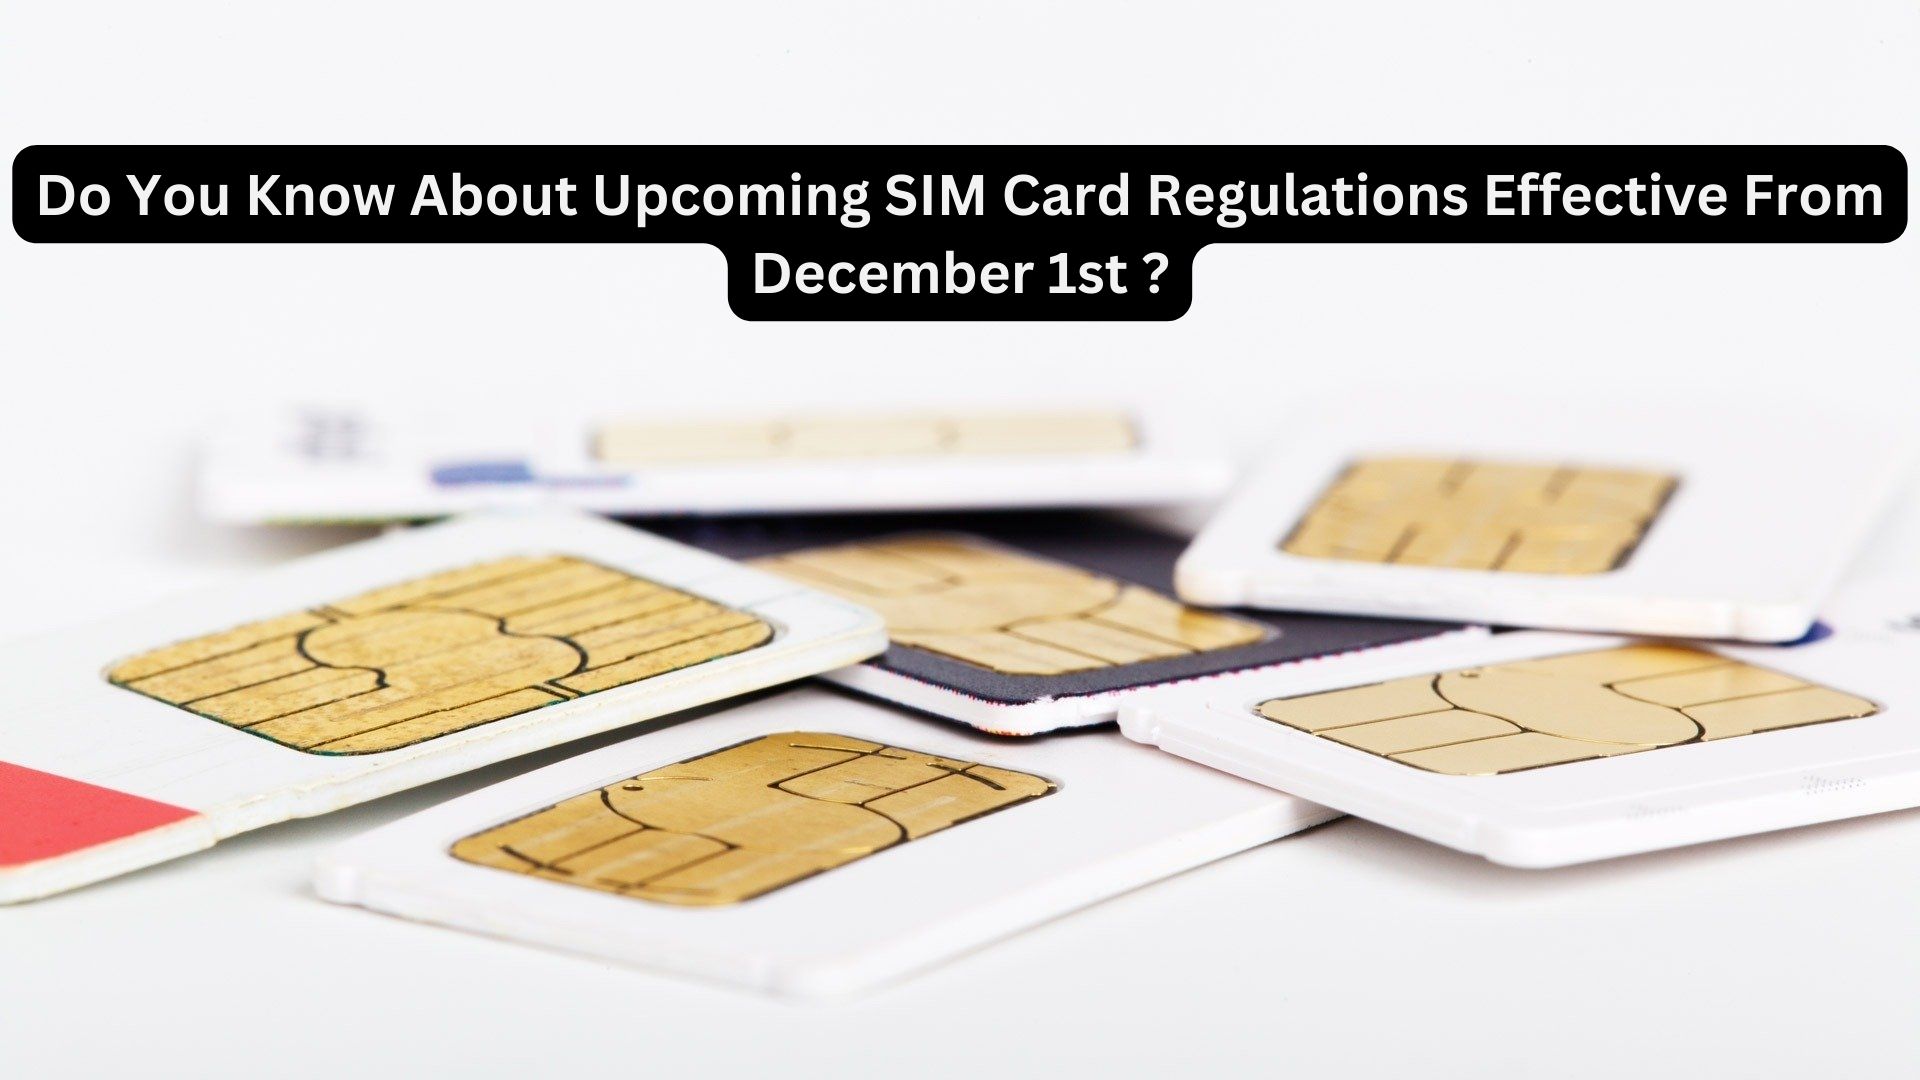 Do You Know About Upcoming SIM Card Regulations Effective From December 1st ?